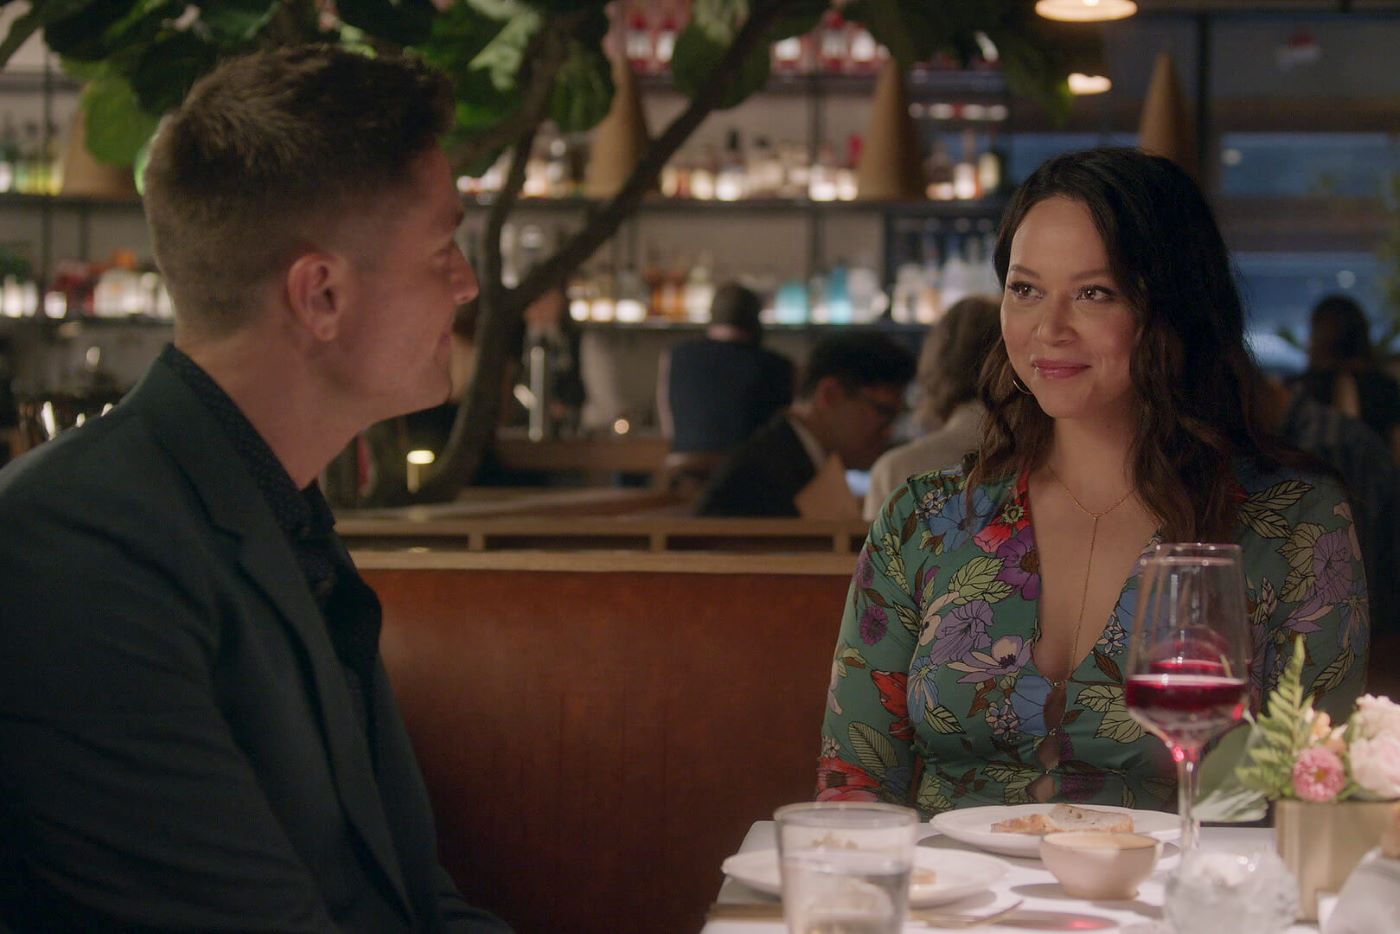 Eric Winter and Melissa O'Neil, in character as Tim Bradford and Lucy Chen in 'The Rookie' Season 5, share a scene at a restaurant. Tim wears a black suit. Lucy wears a long-sleeved green dress with multi-colored flowers on it.